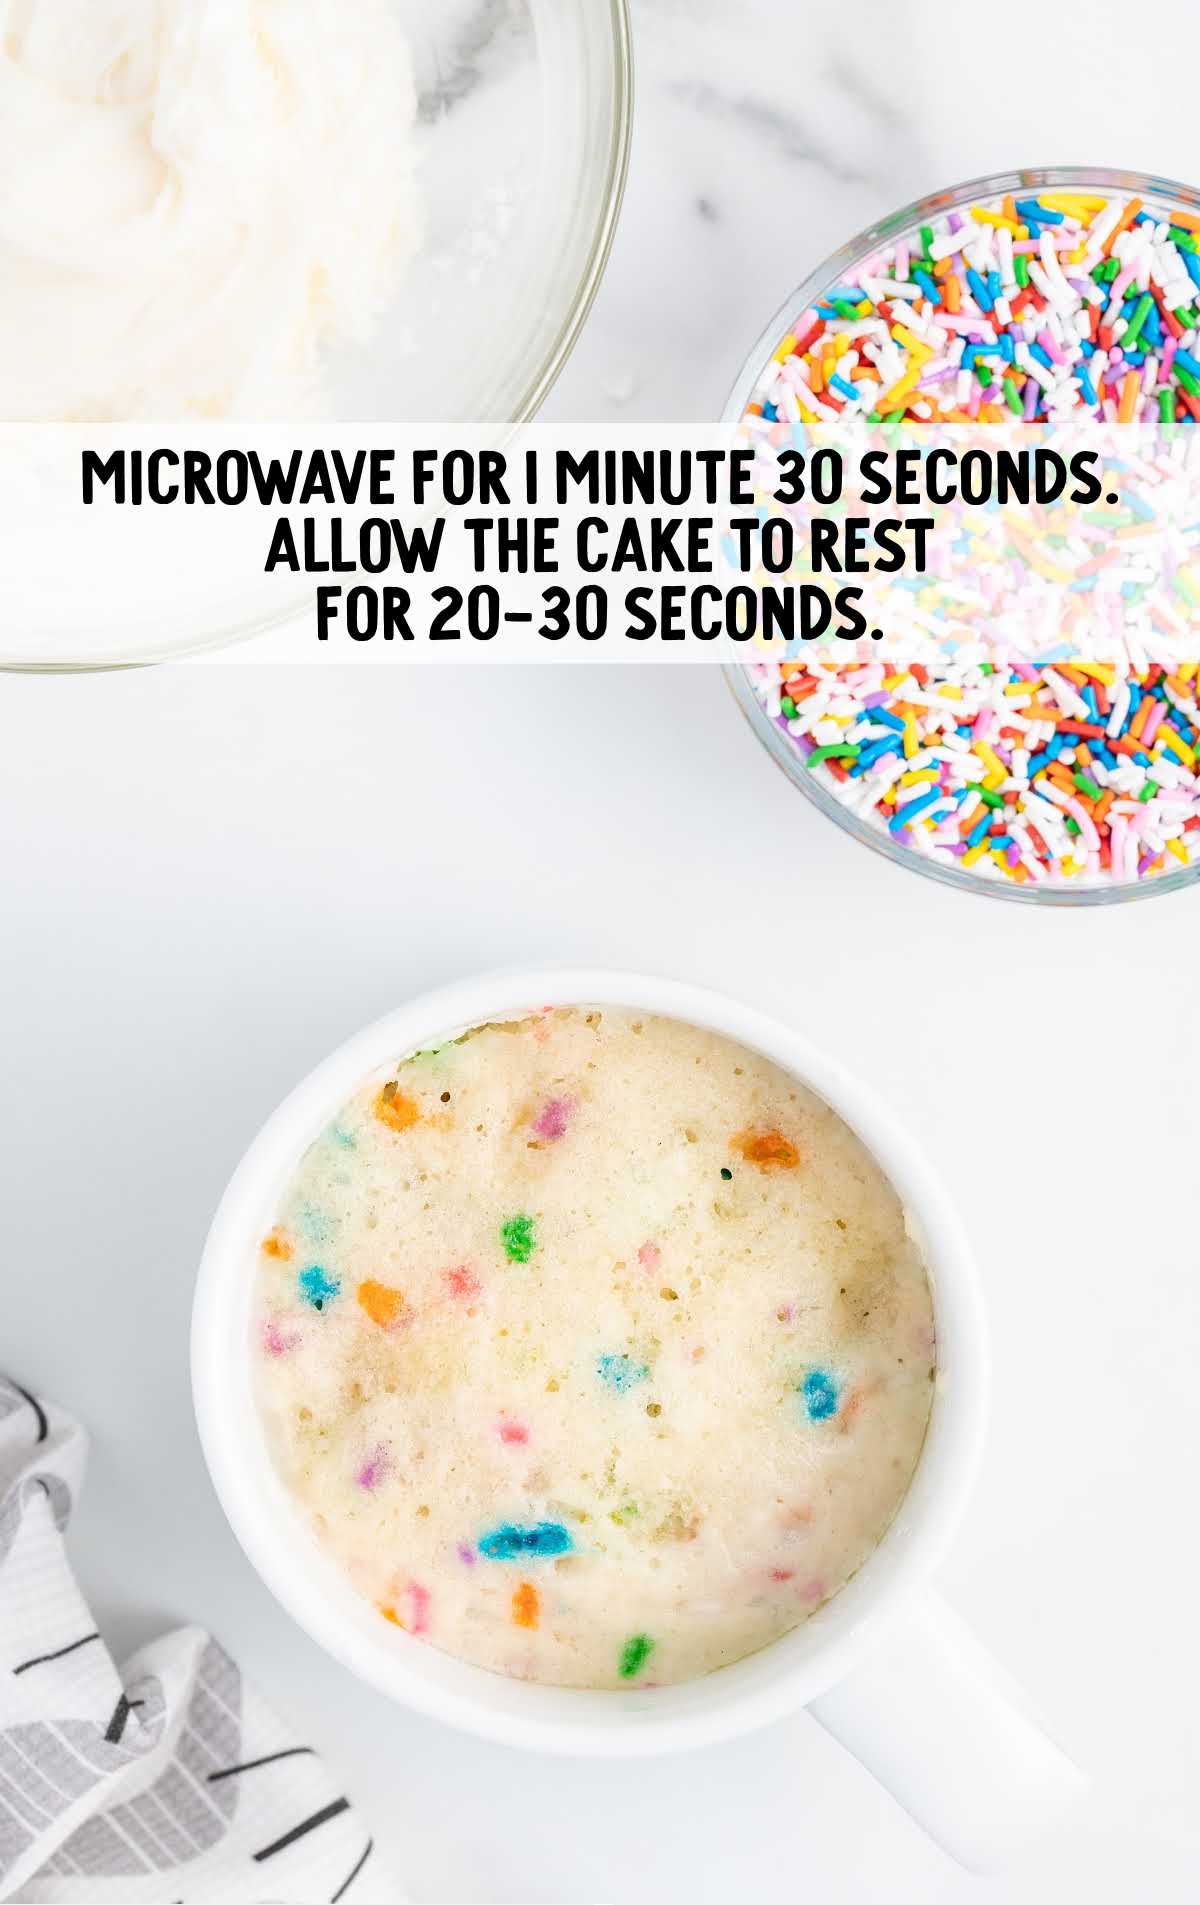 microwave the cupcake in a mug for 20-30 seconds